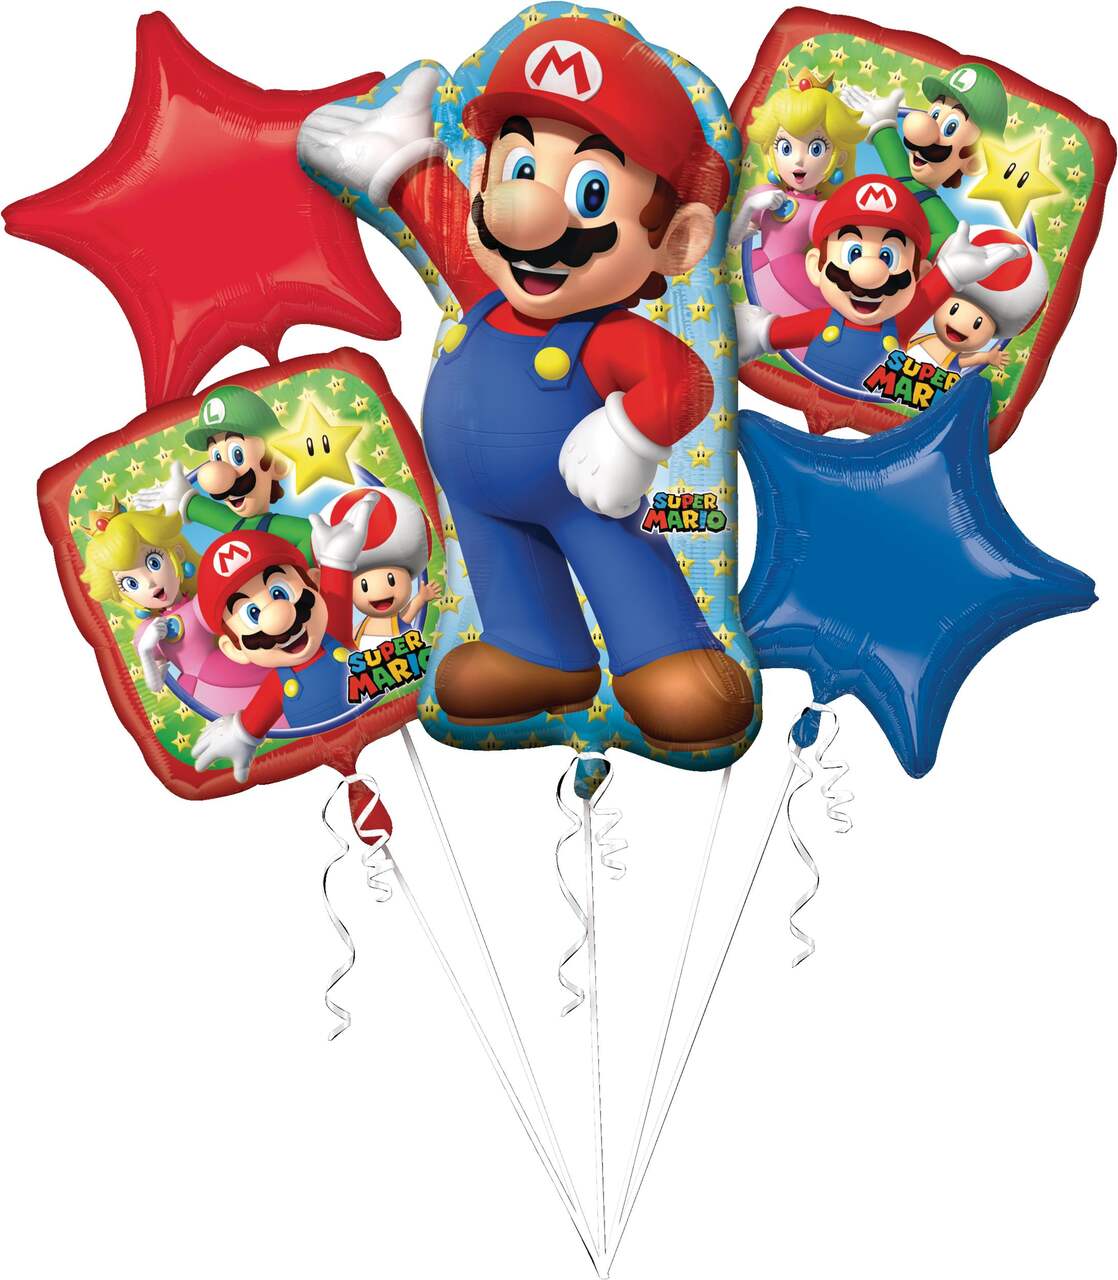 https://media-www.canadiantire.ca/product/automotive/party-city-everyday/party-city-balloons-accessories/8424571/bqt-blln-fl-mario-bros-0cb0d966-feba-44ff-bc4b-ab807097e8ba-jpgrendition.jpg?imdensity=1&imwidth=640&impolicy=mZoom